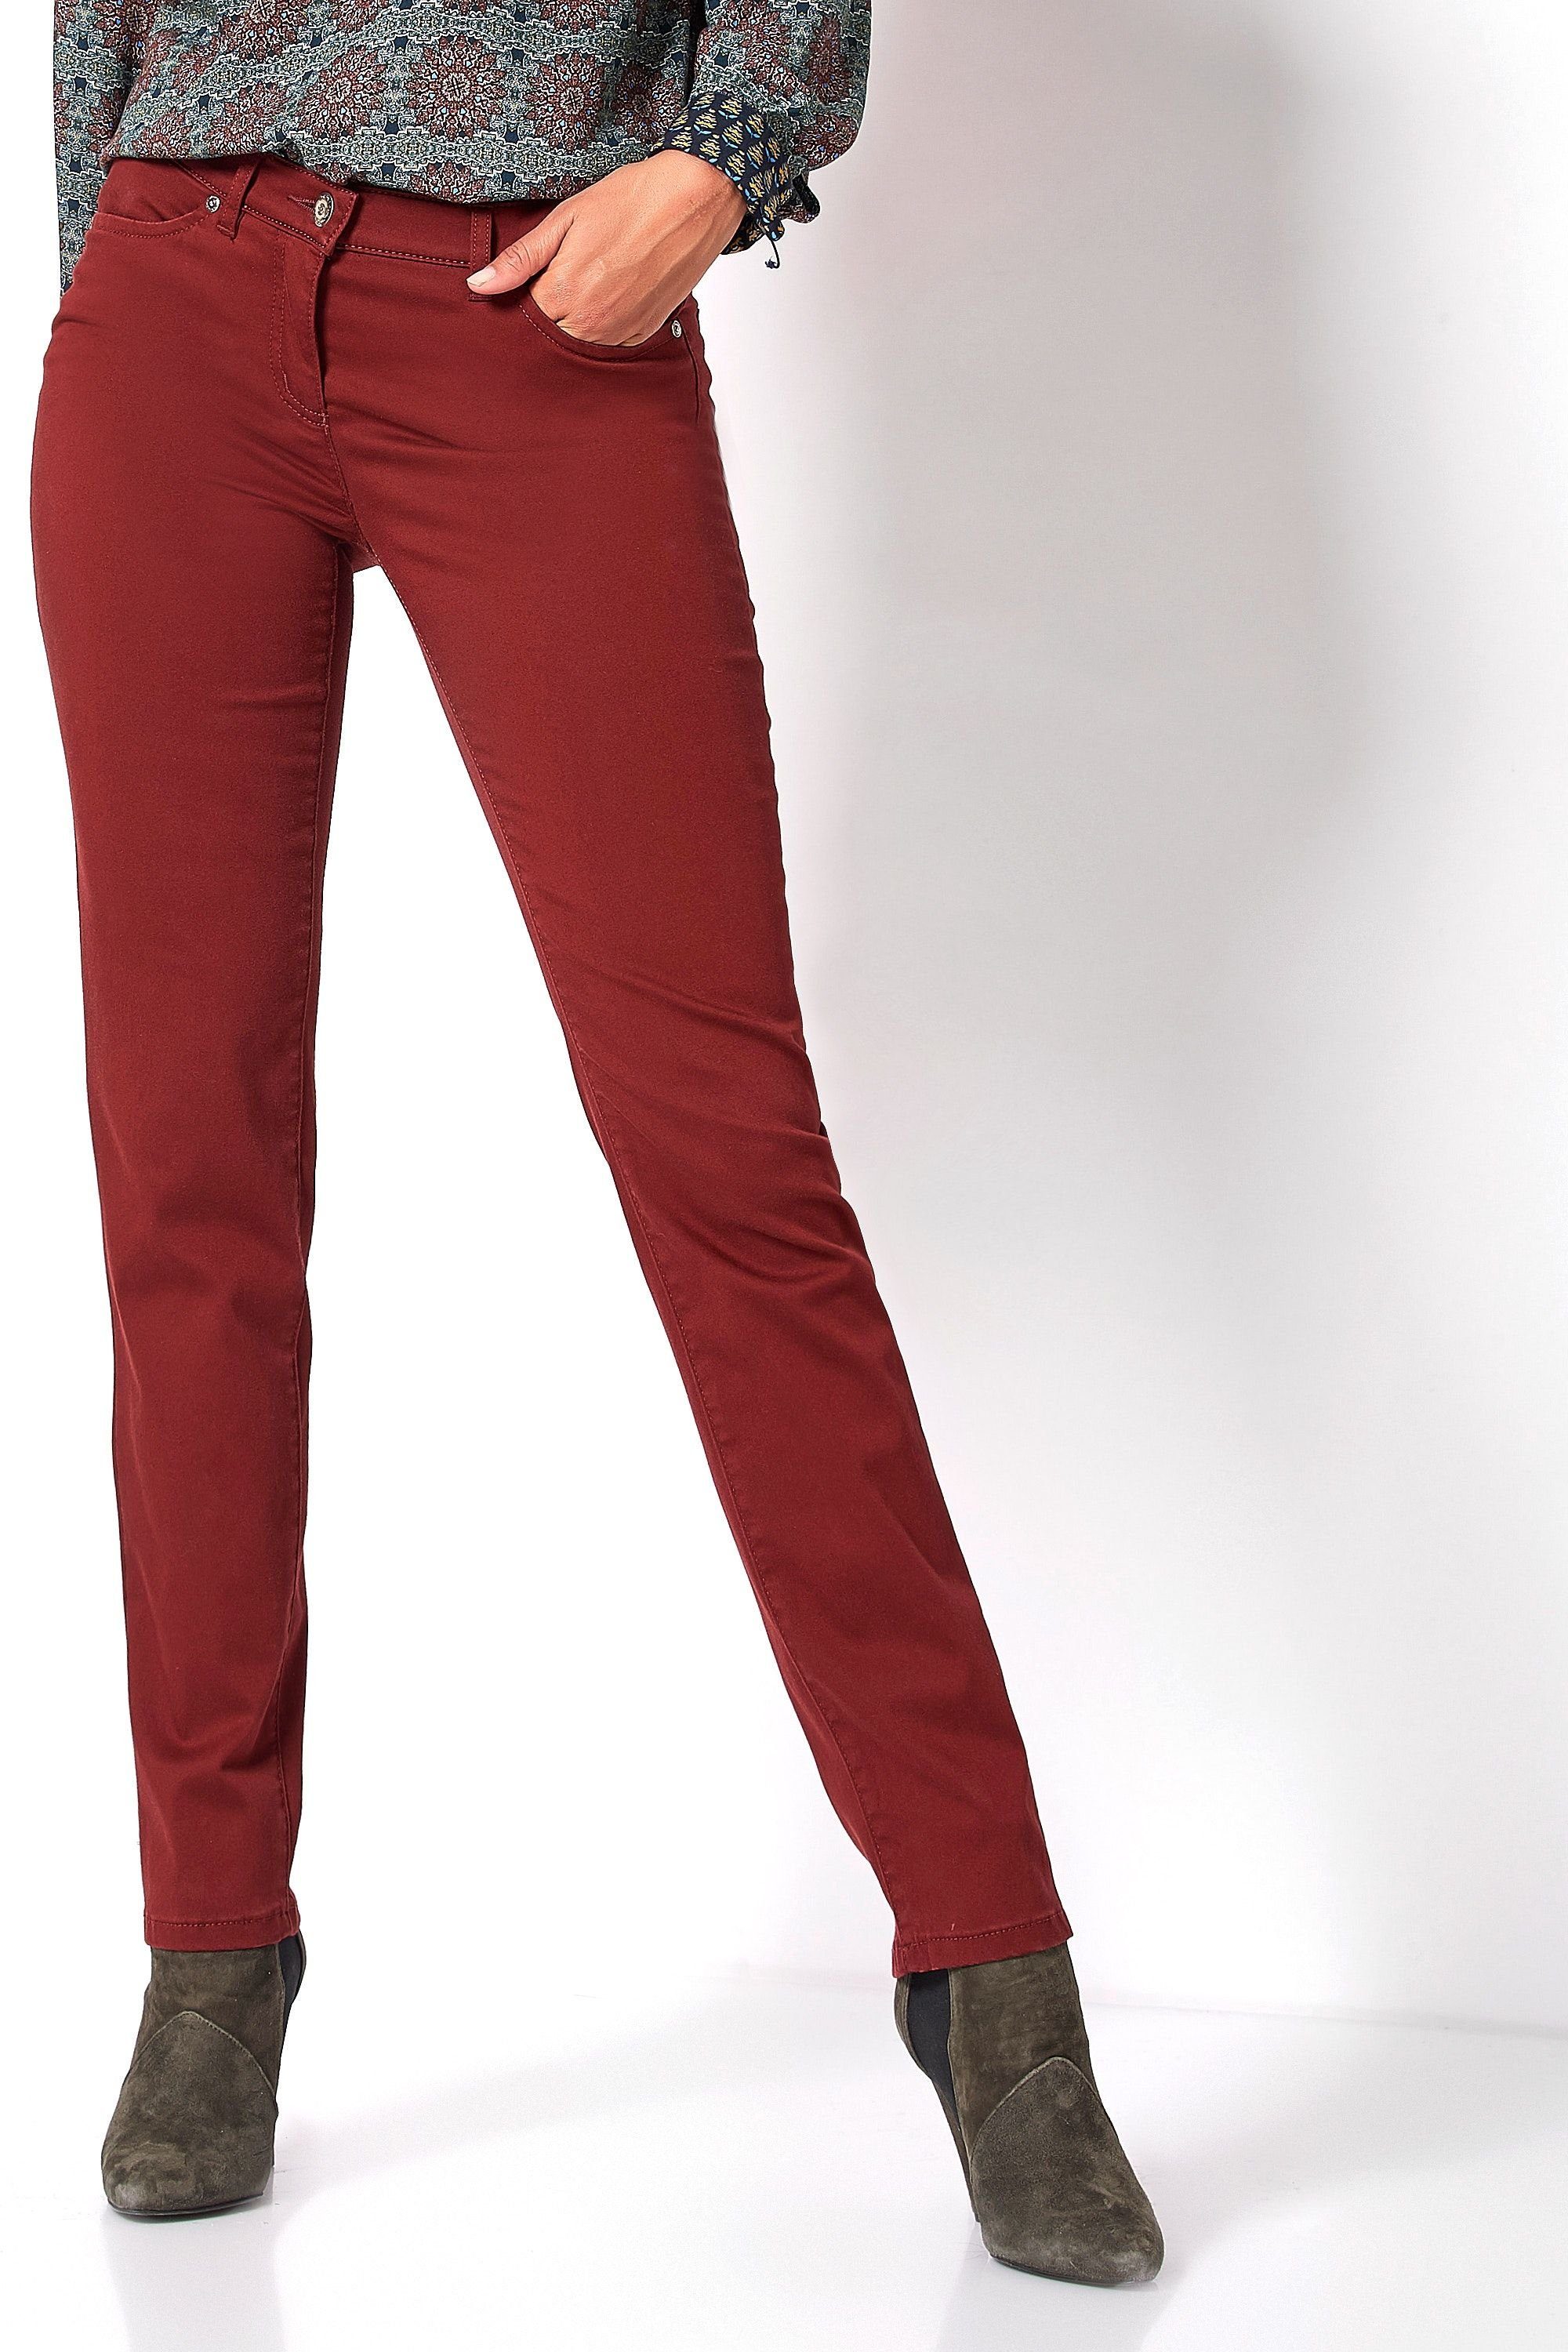 TONI 5-Pocket-Jeans rusty red